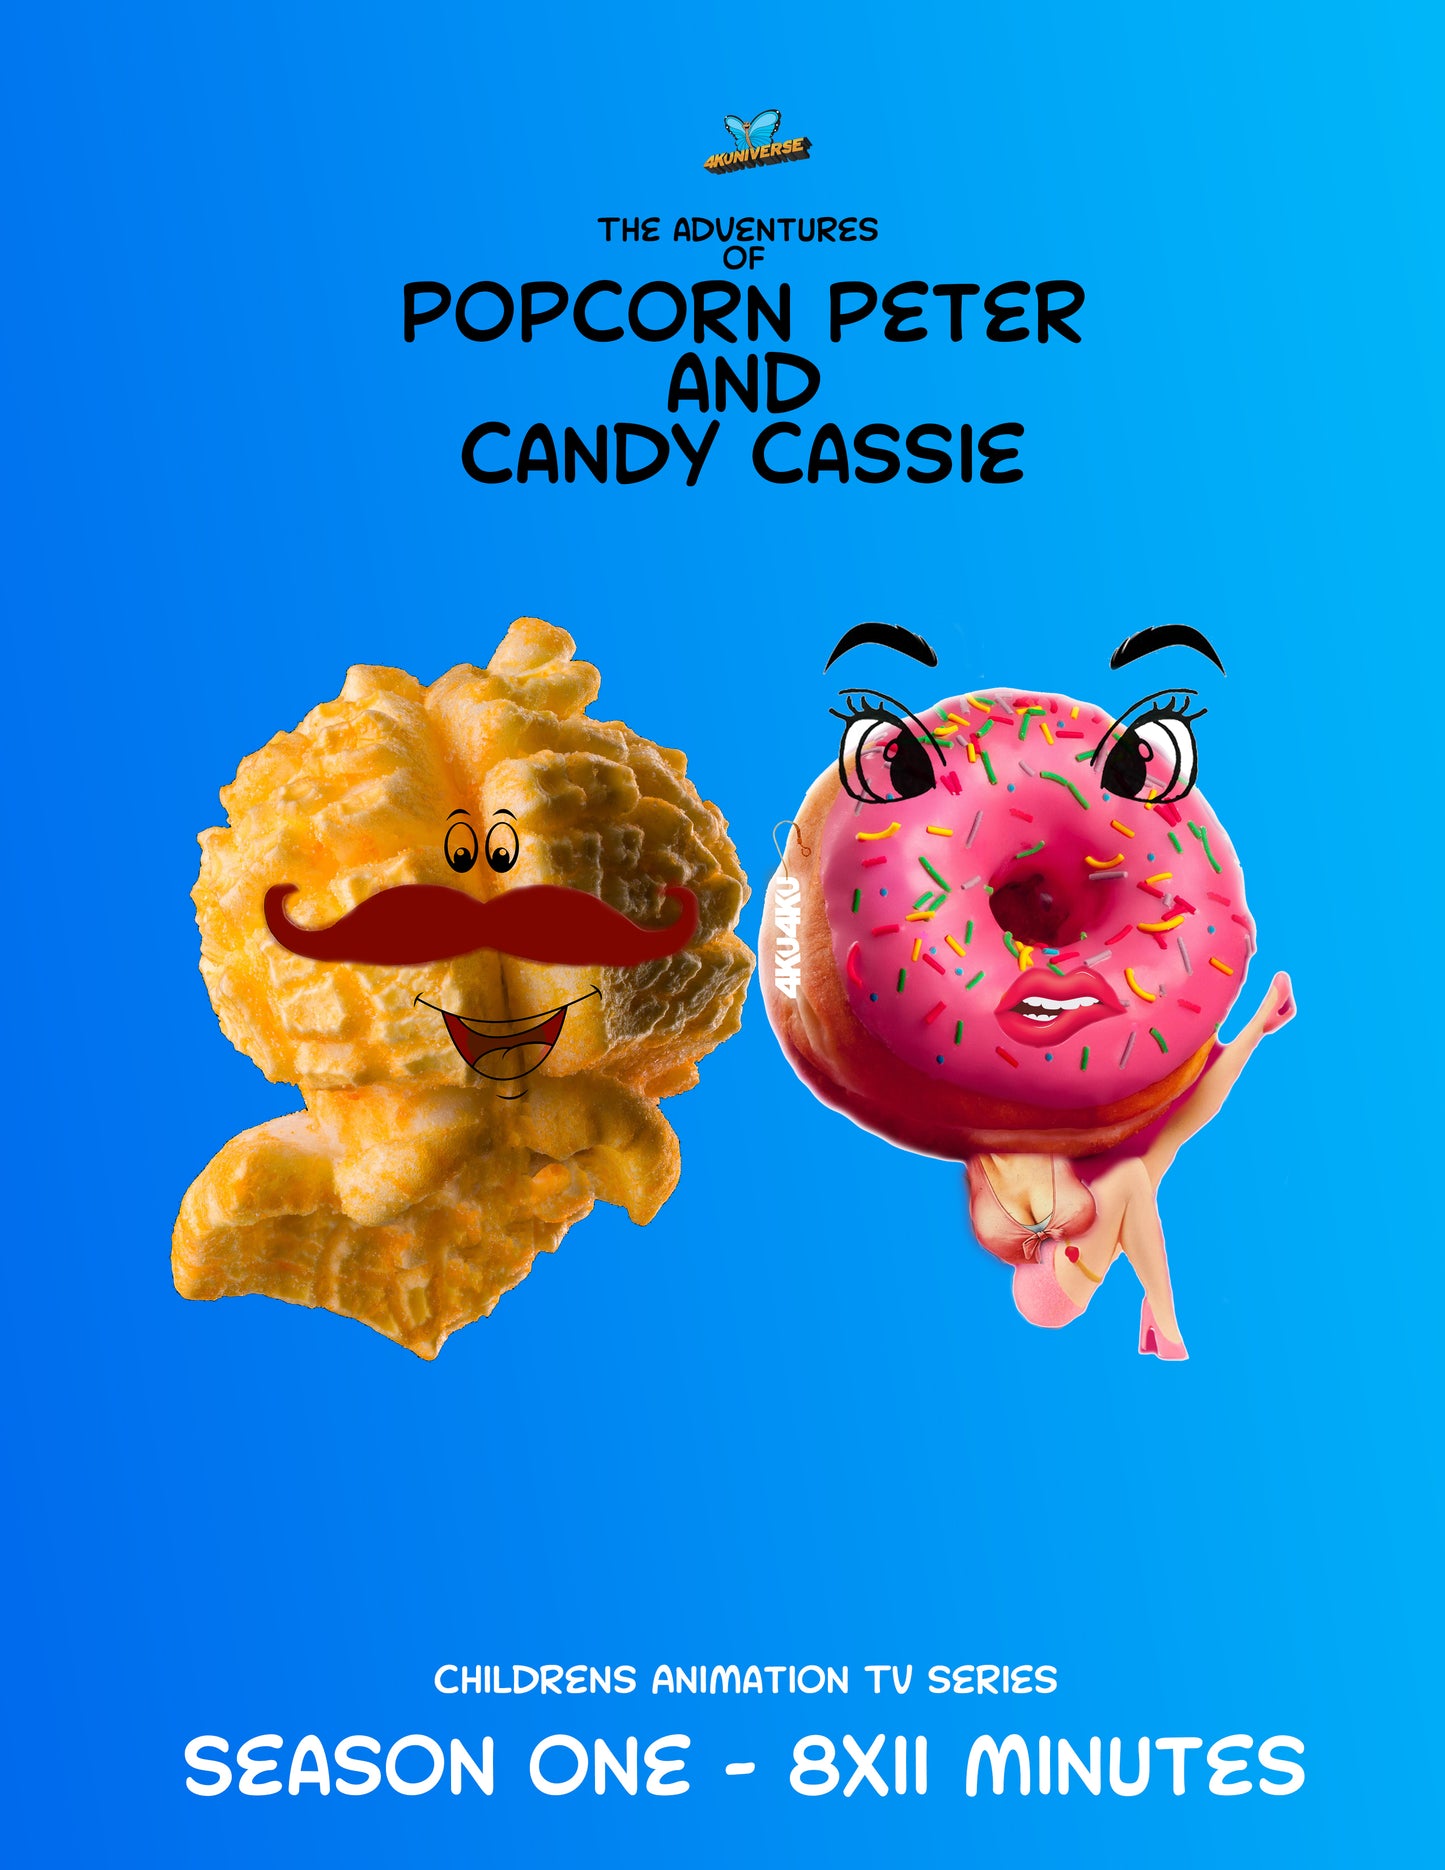 The Adventures of Popcorn Peter and Candy Cassie (8x11min)